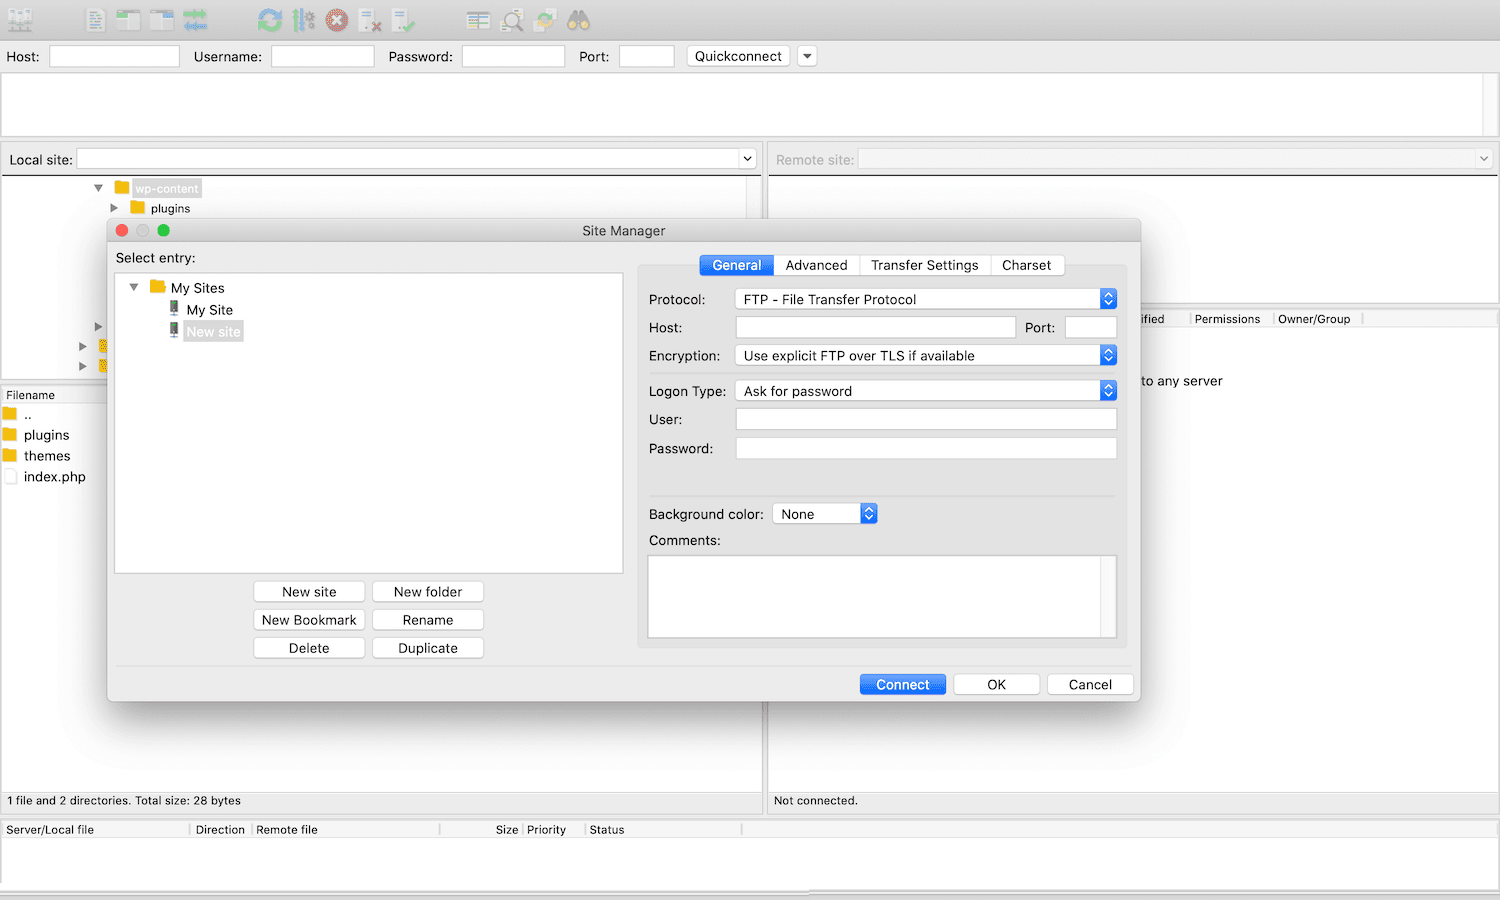 A screenshot showing the FileZilla FTP client window dialog for connecting to a server.